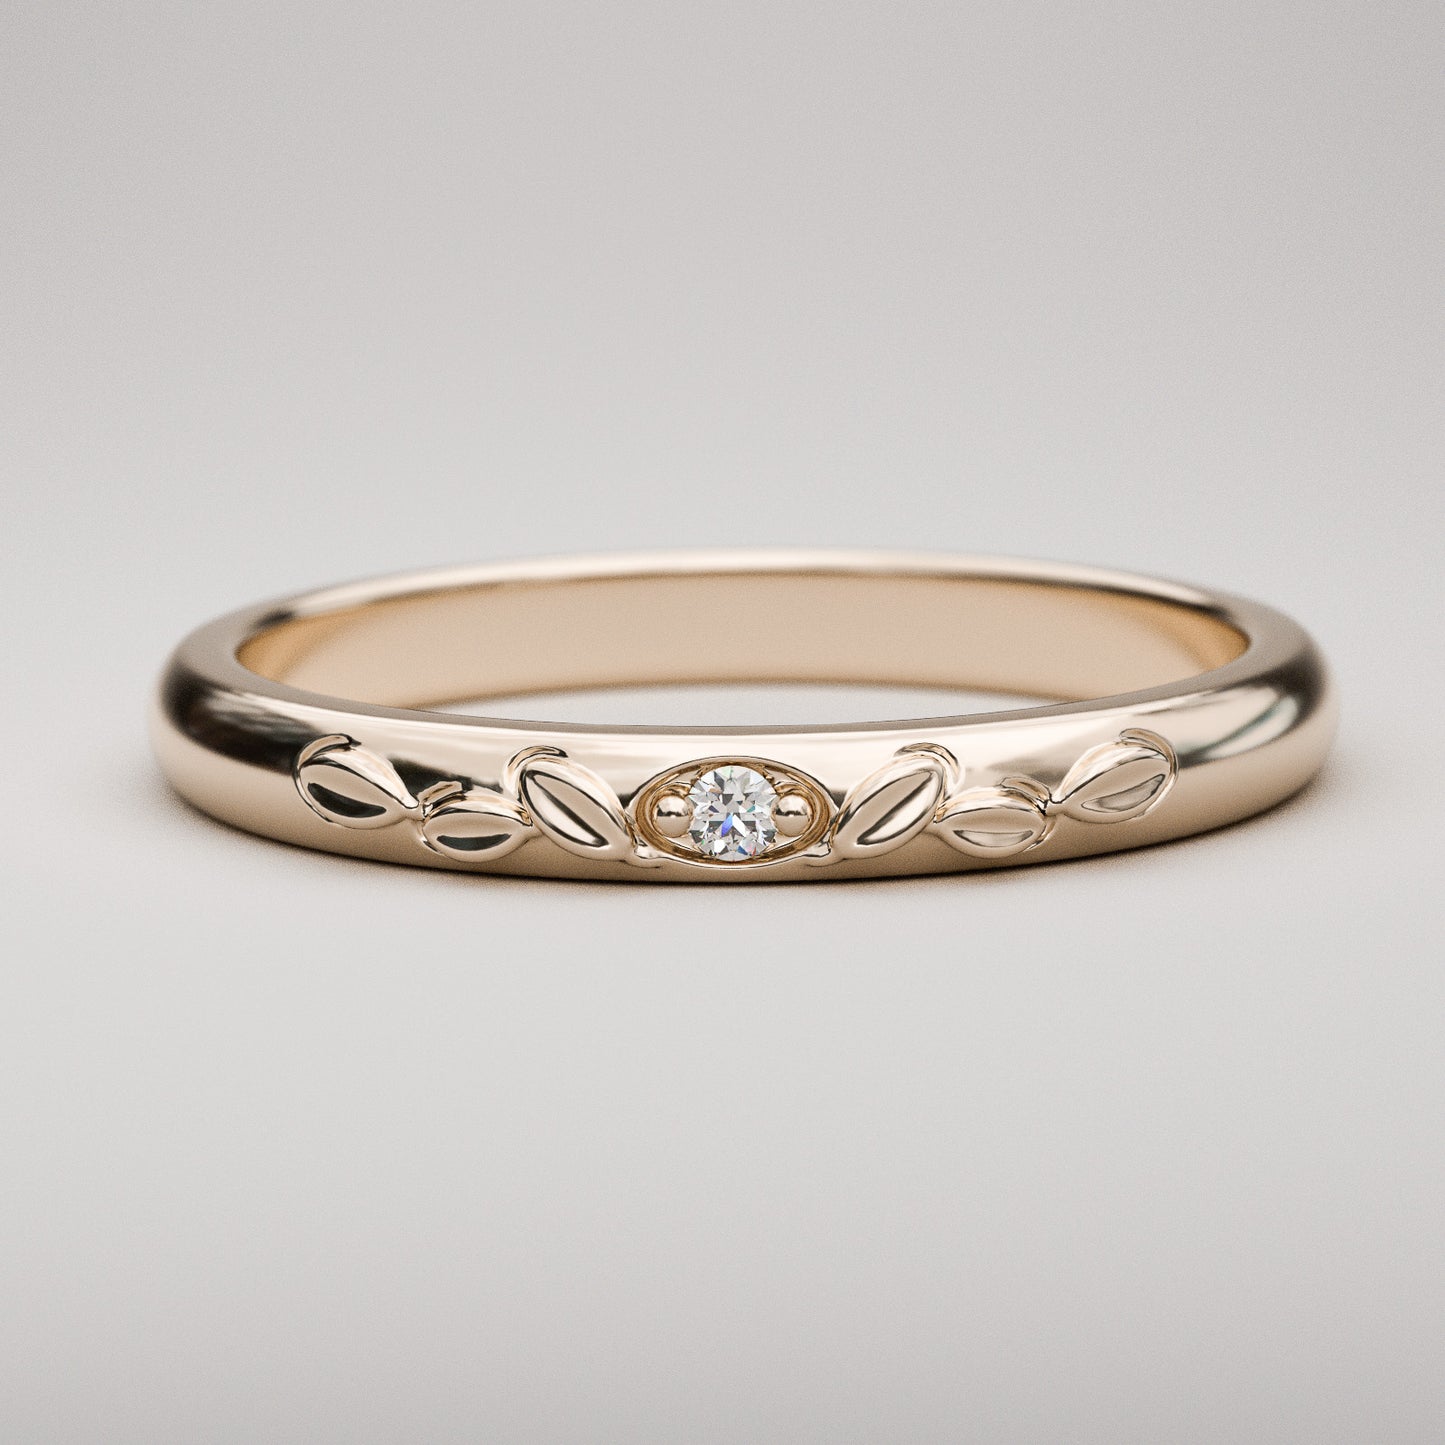 vintage inspired wedding band with leaves and small diamond in rose gold